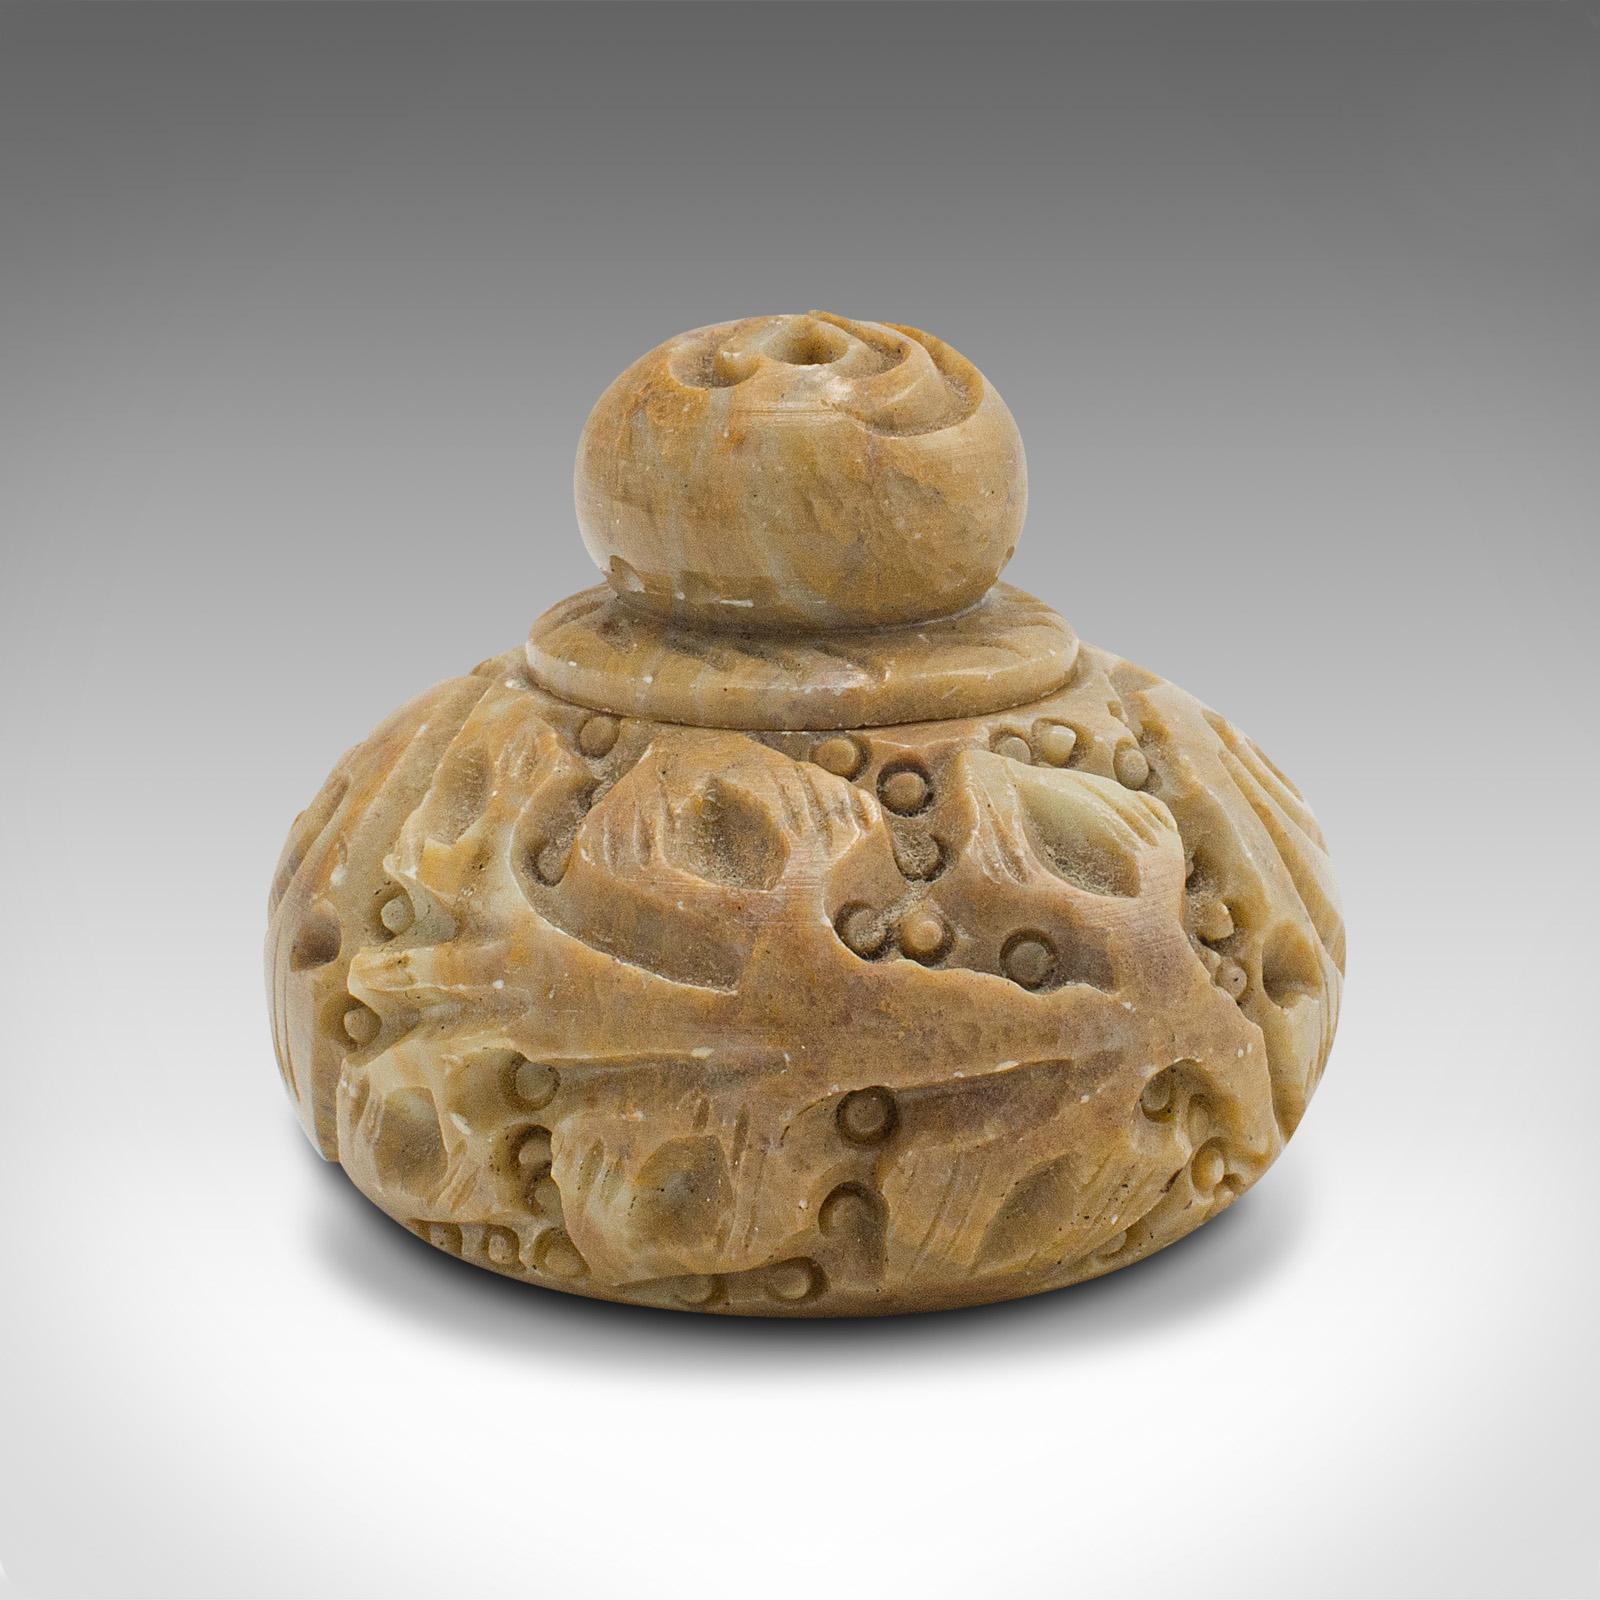 Small Antique Snuff Pot Chinese Carved Marble, Lidded Jar Victorian, circa 1900 In Good Condition For Sale In Hele, Devon, GB